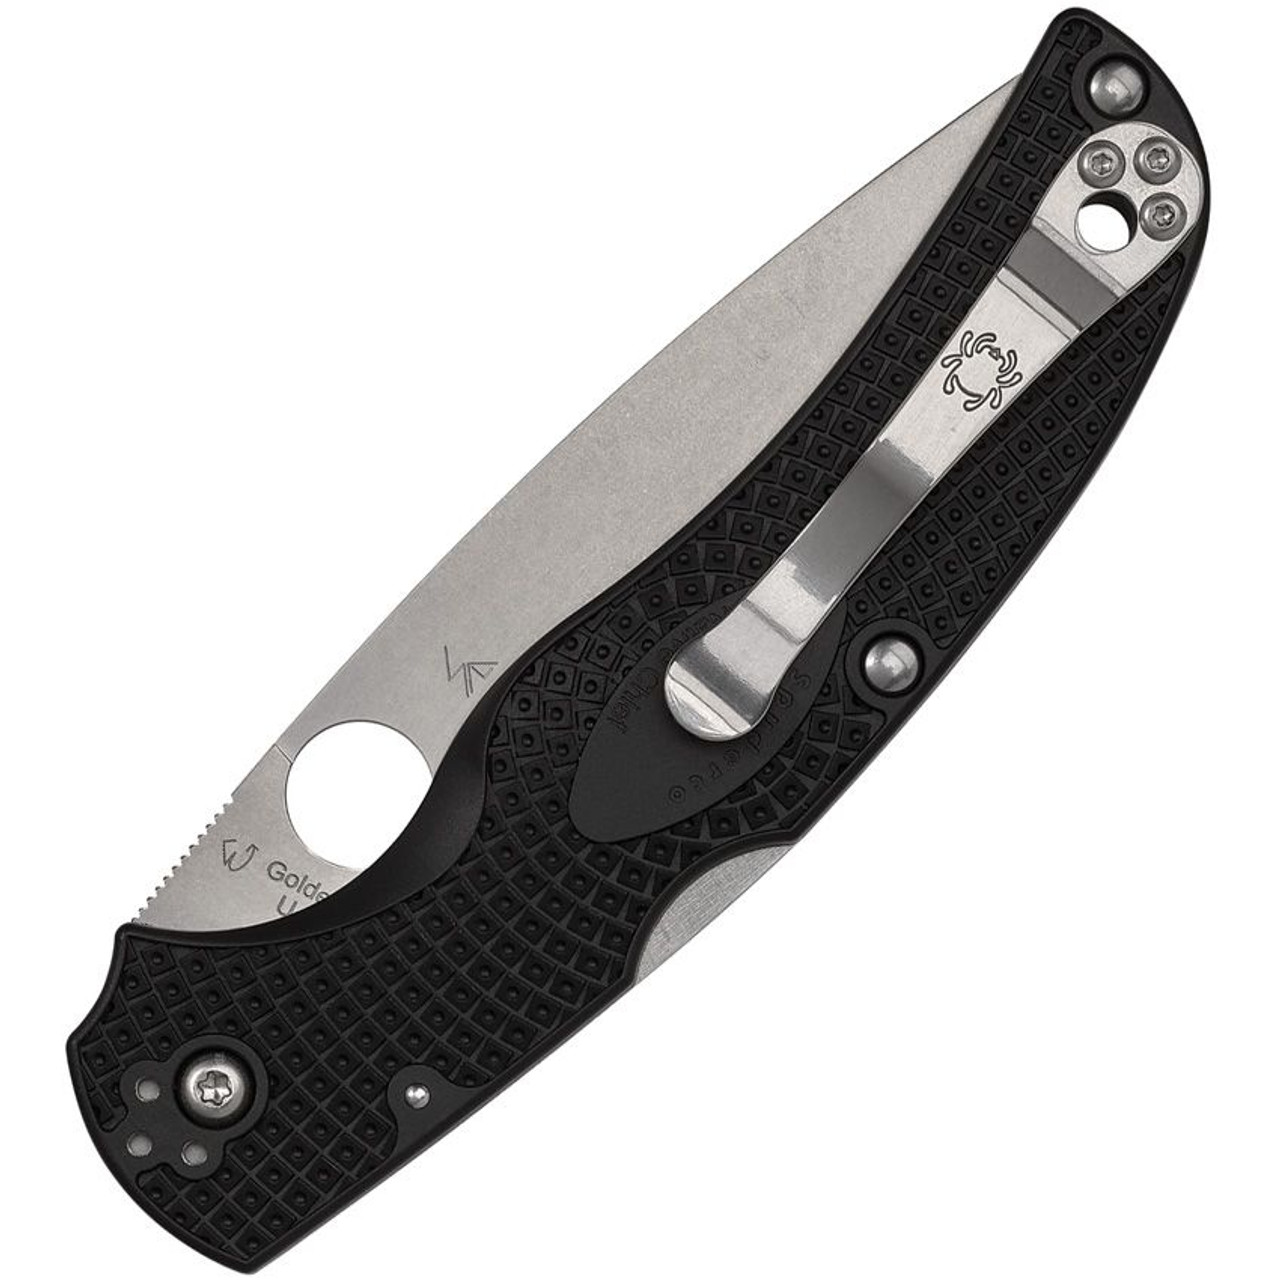 Spyderco Native Chief Lockback - CTS-BD1 stainless blade